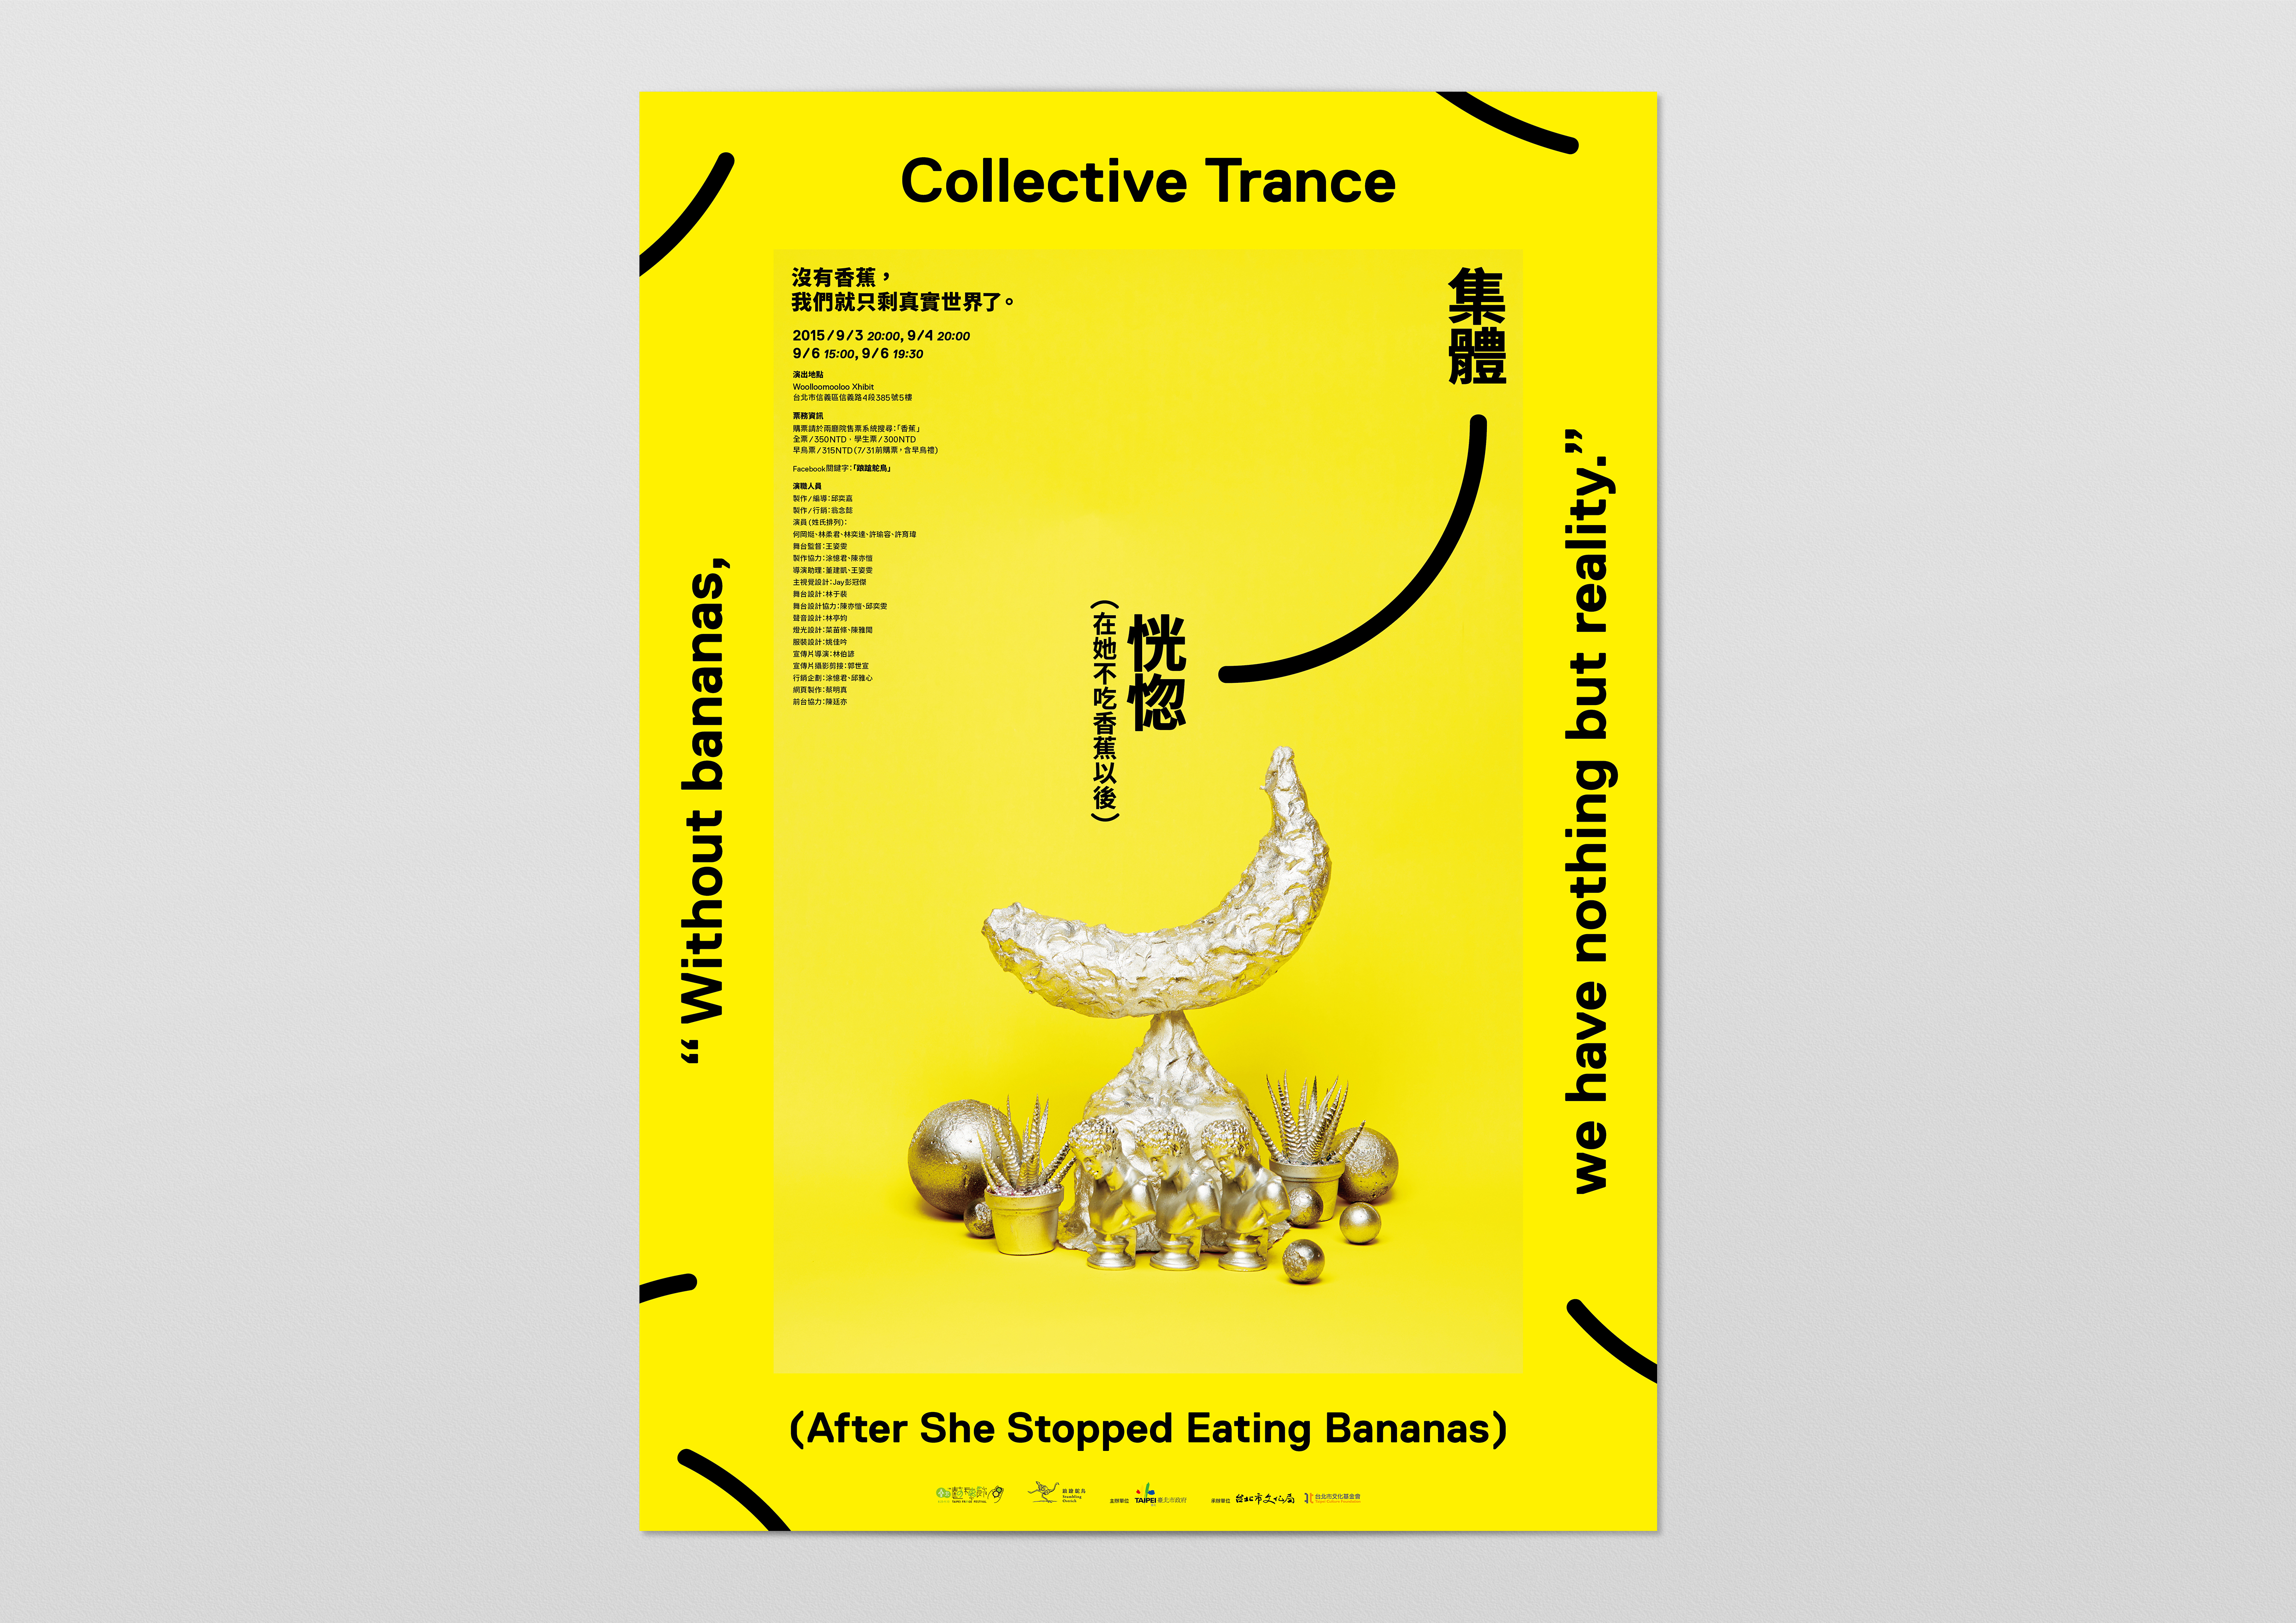 Collective Trance, Image courtesy of Jay Guan-Jie Peng